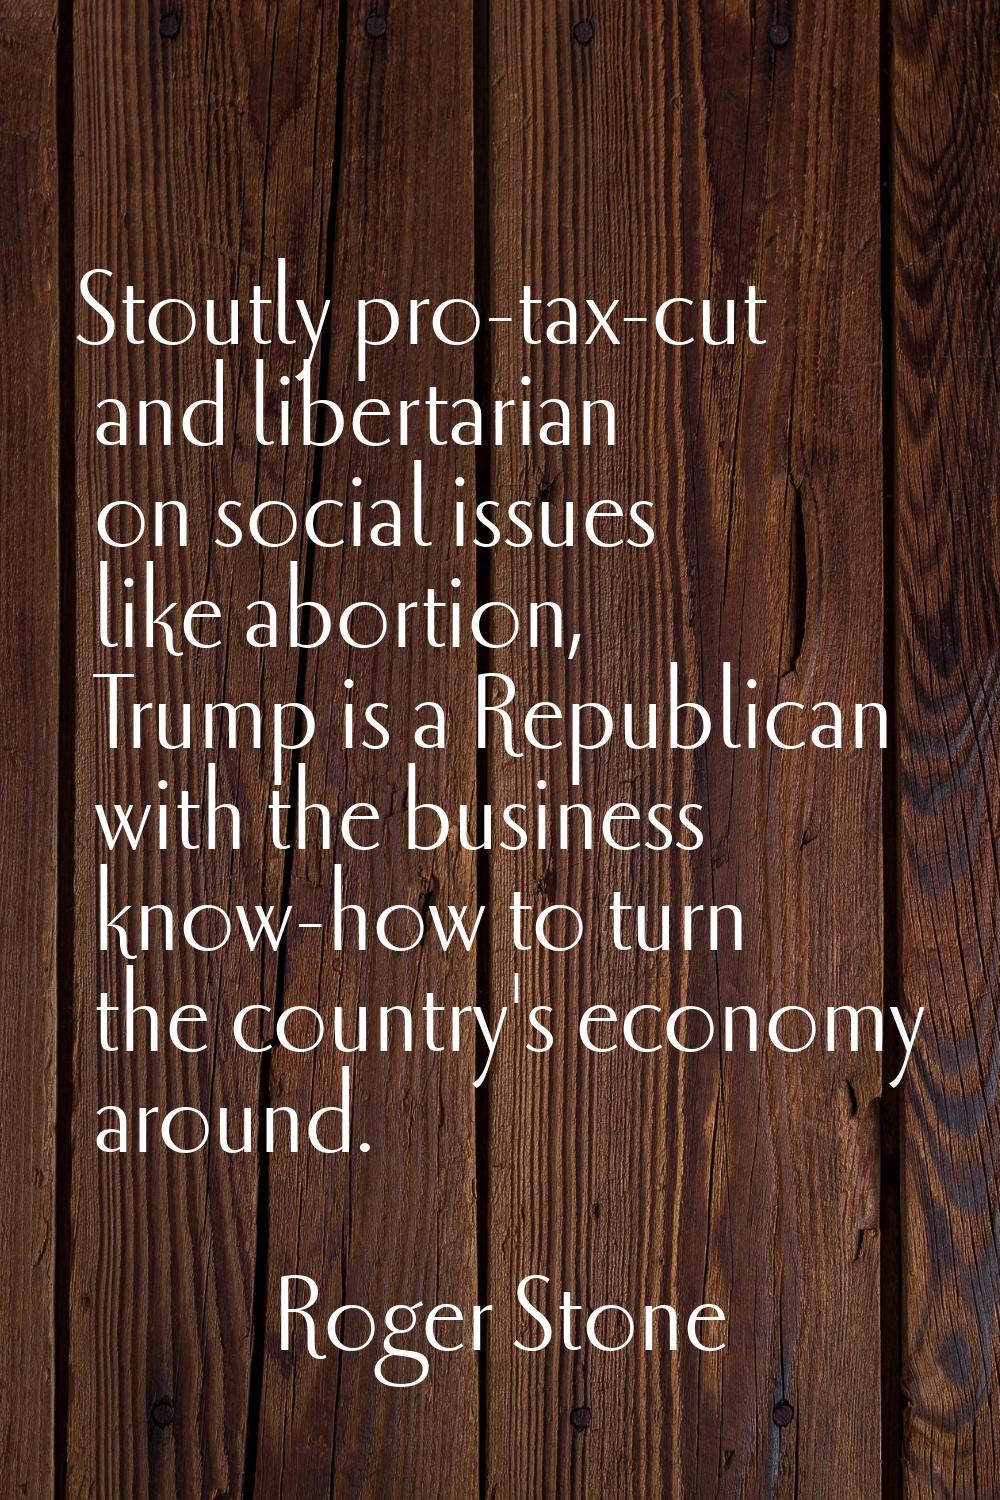 Stoutly pro-tax-cut and libertarian on social issues like abortion, Trump is a Republican with the 